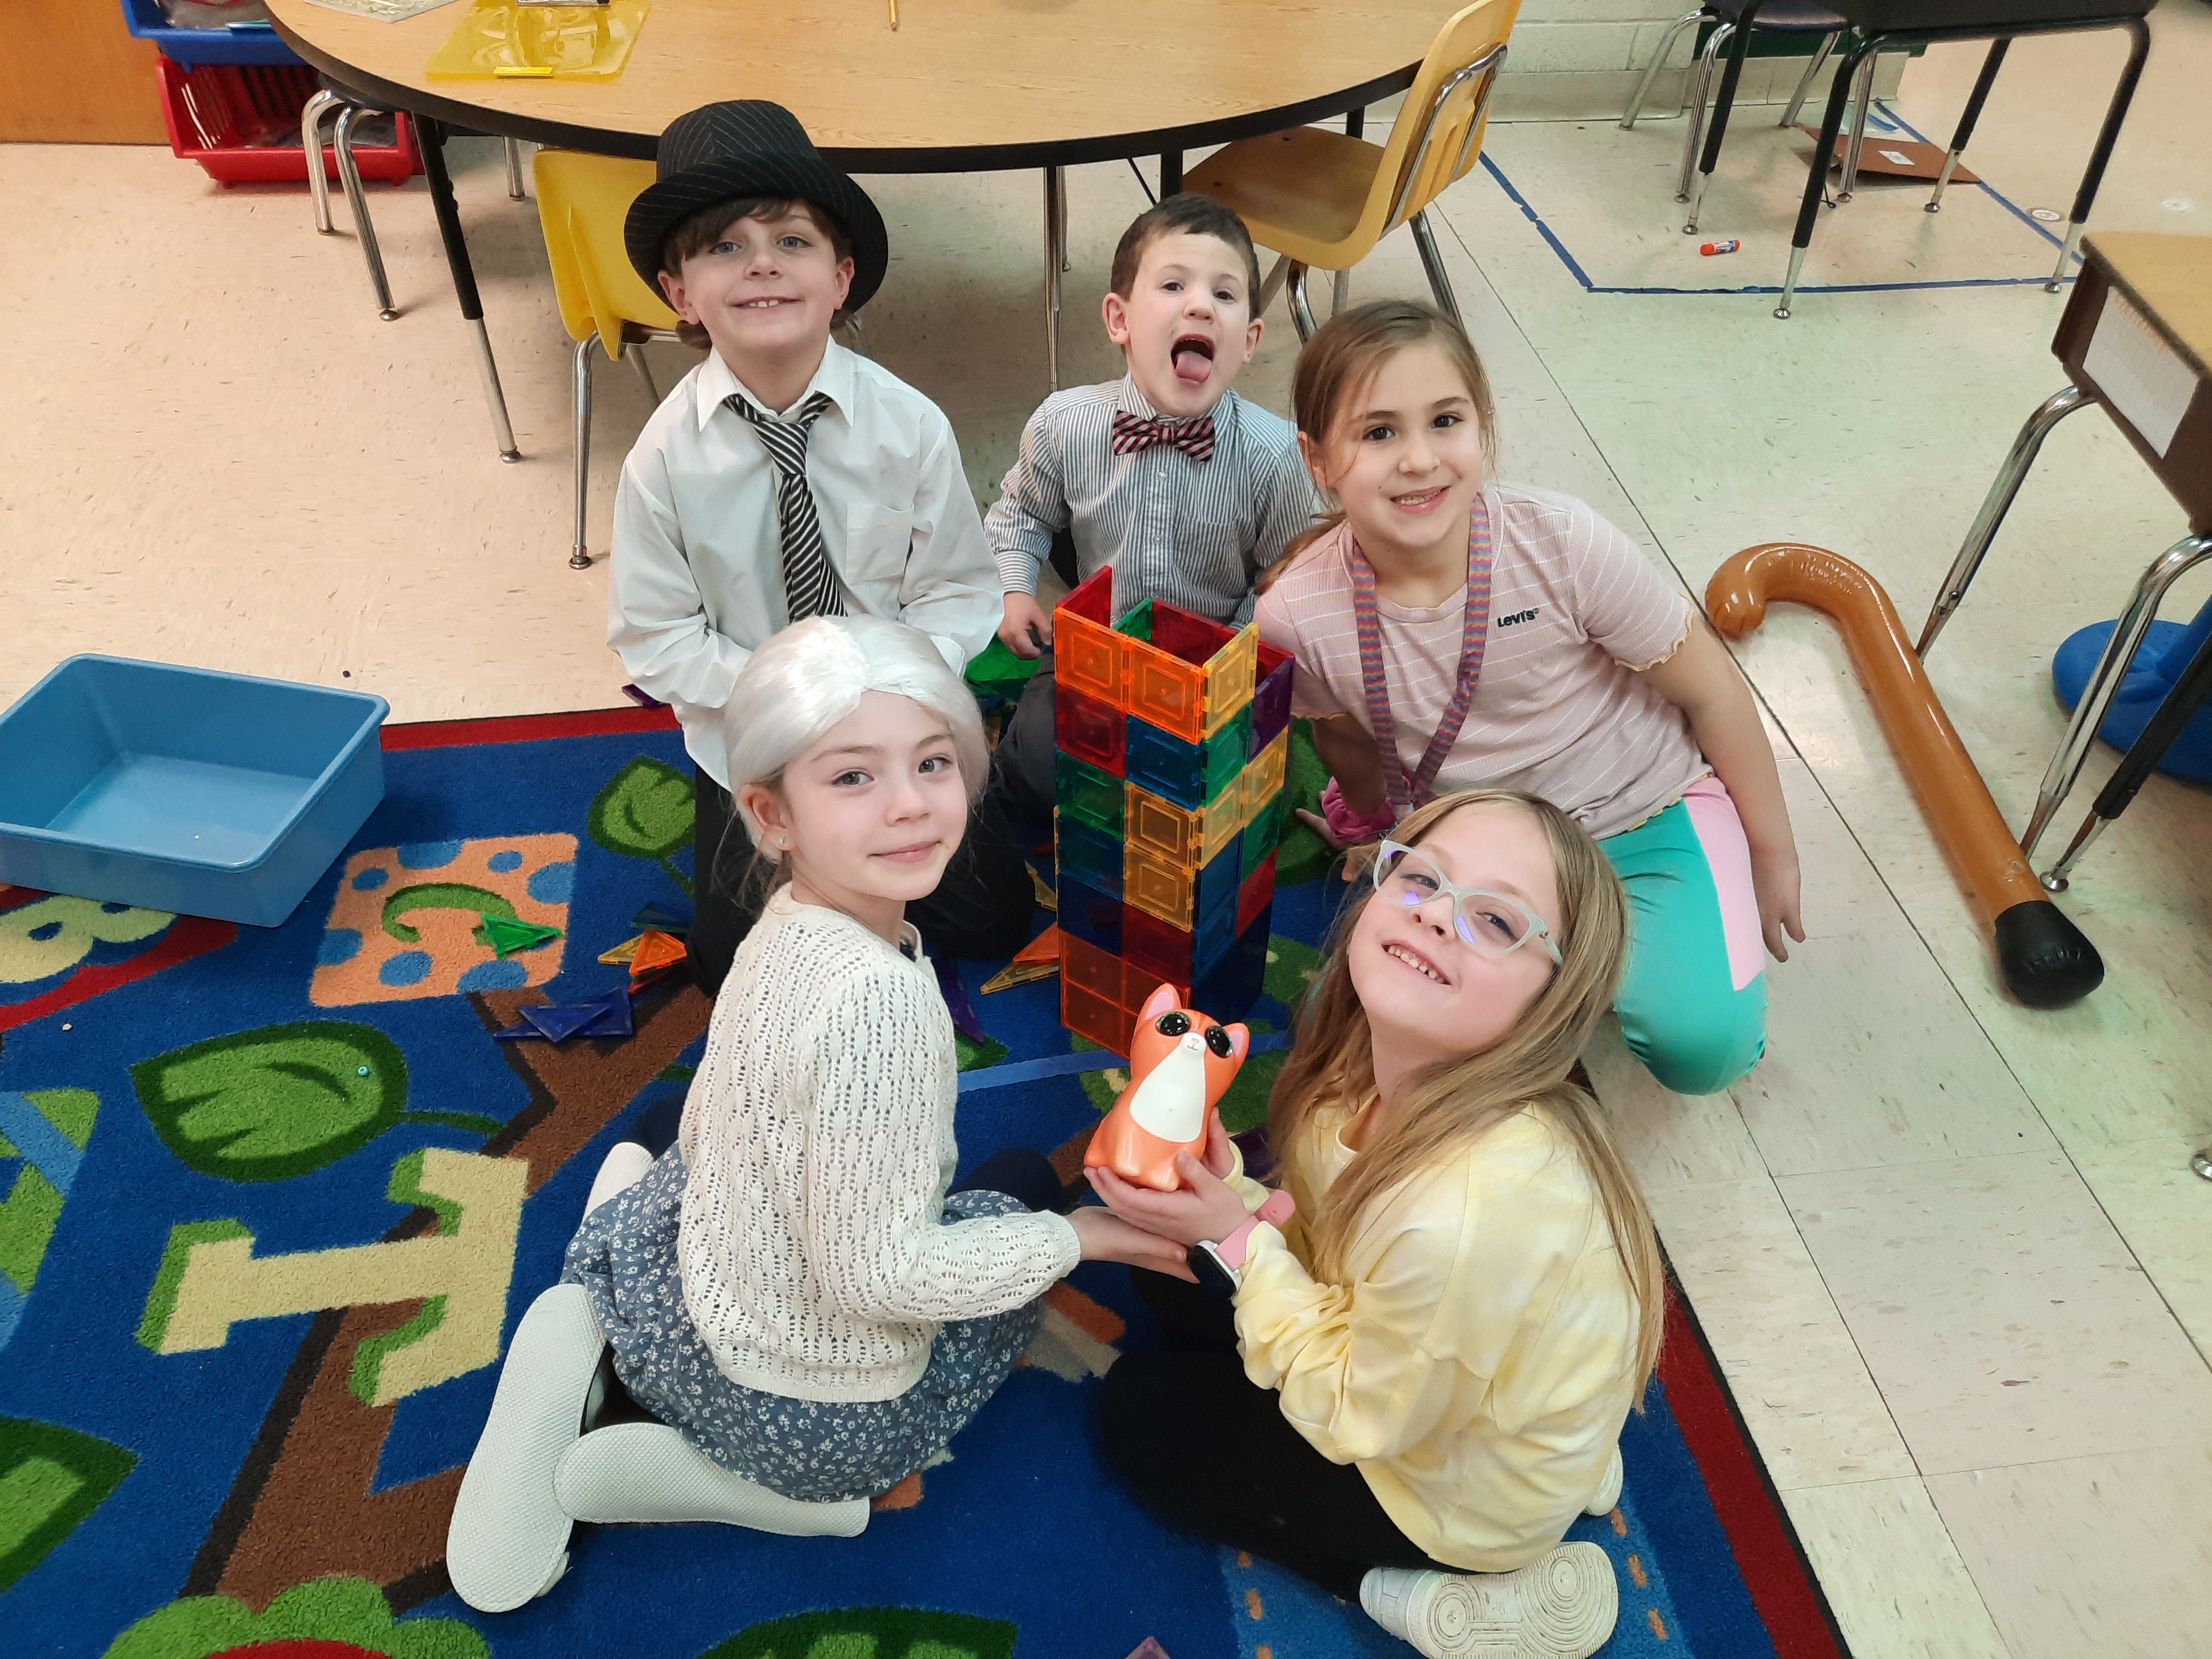 Five students building a tower with blocks.